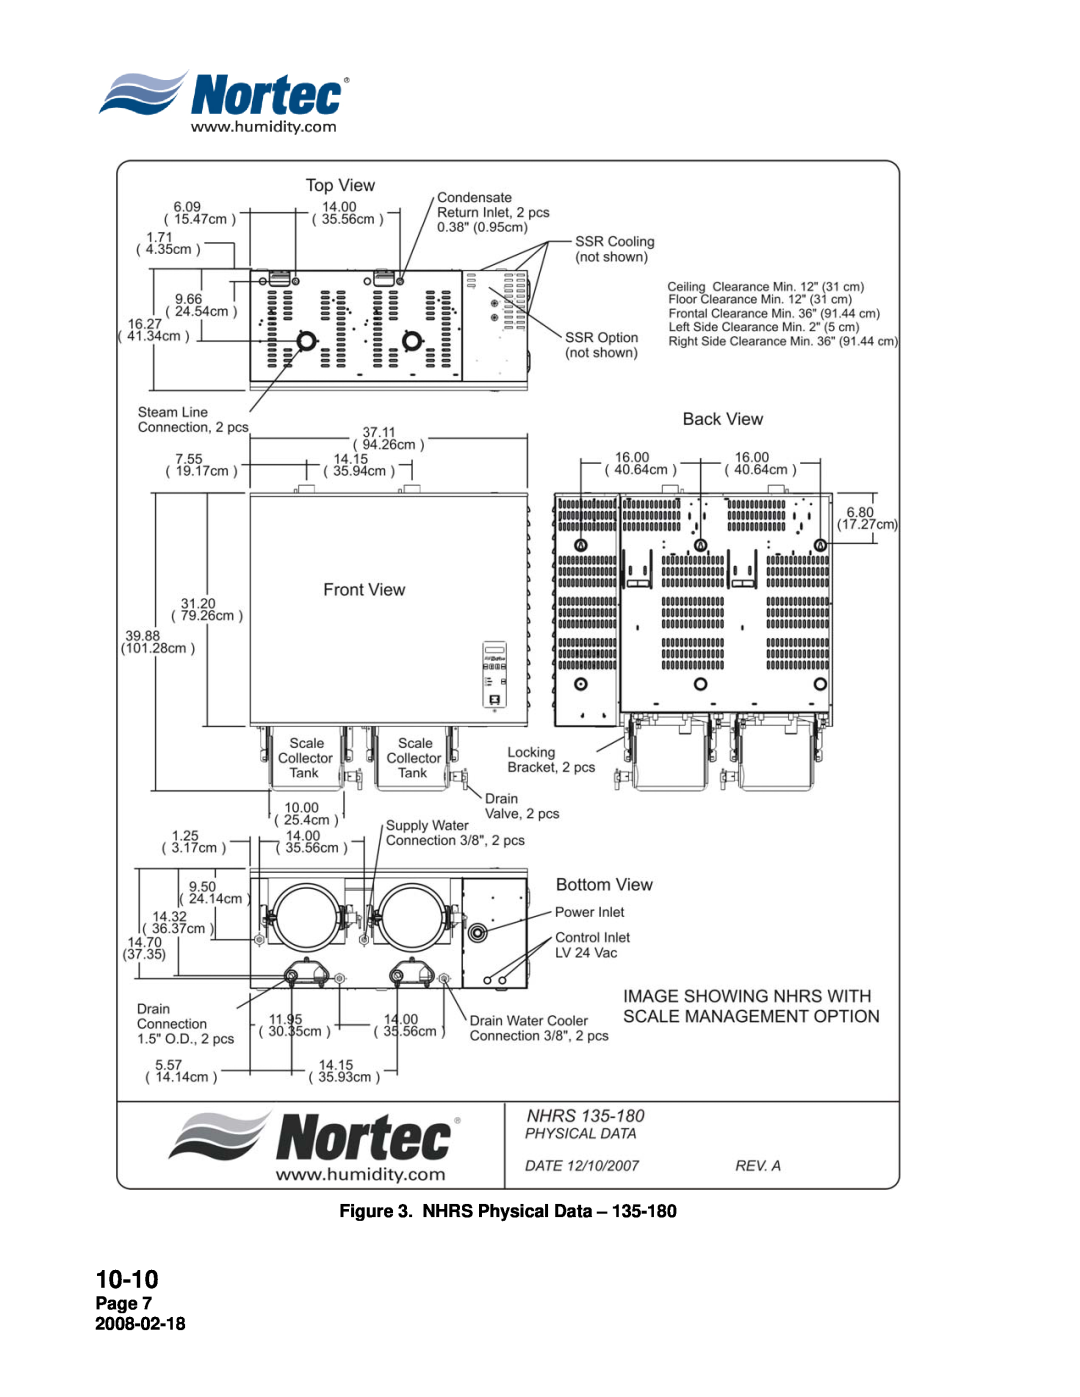 Nortec Industries NHRS Series manual 10-10, NHRS Physical Data, Page 